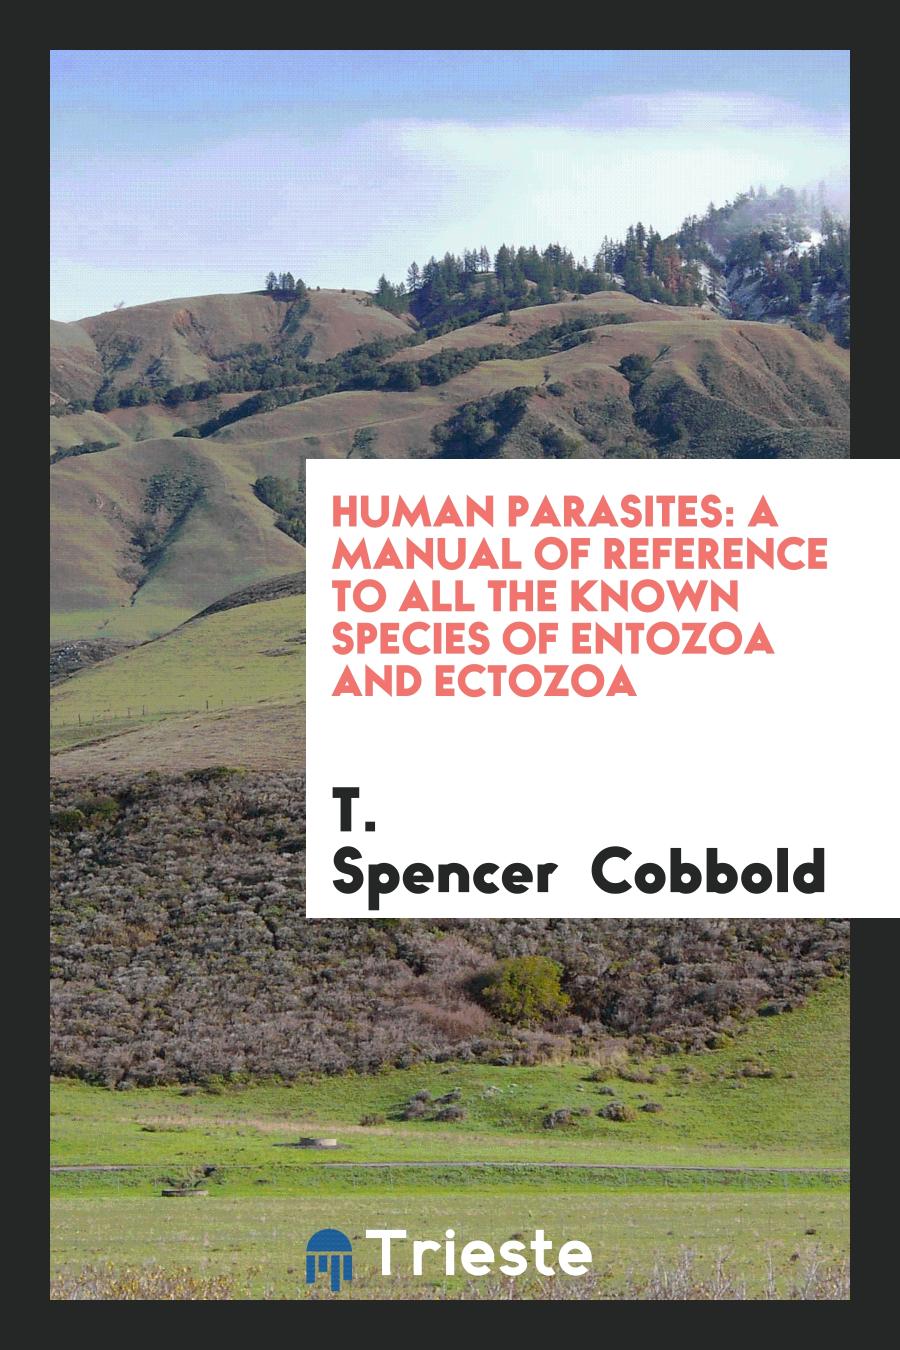 Human Parasites: A Manual of Reference to All the Known Species of Entozoa and Ectozoa